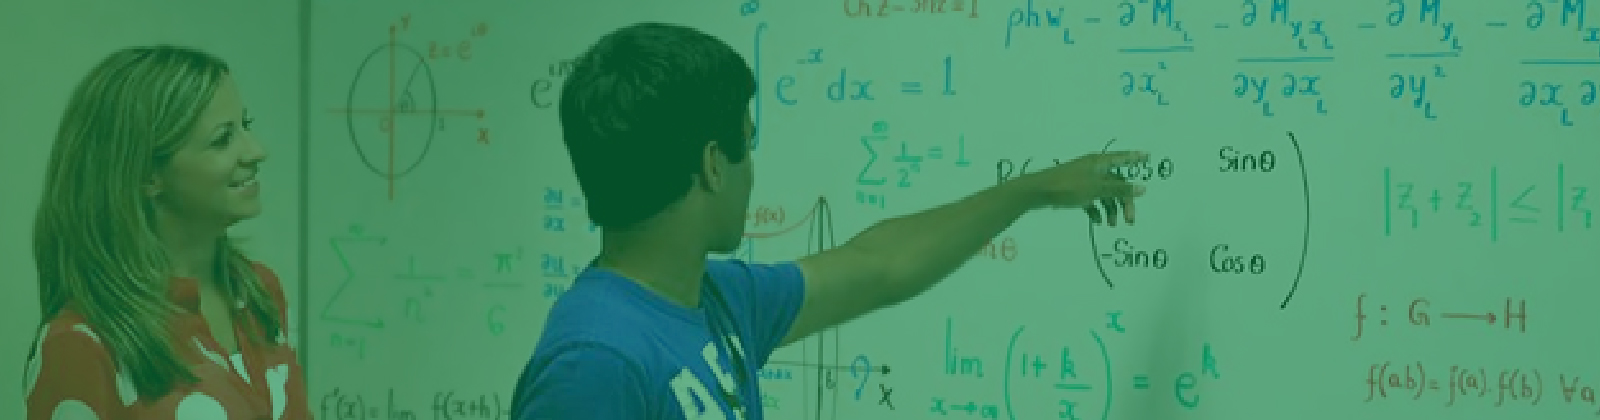 Student at White Board with Equations